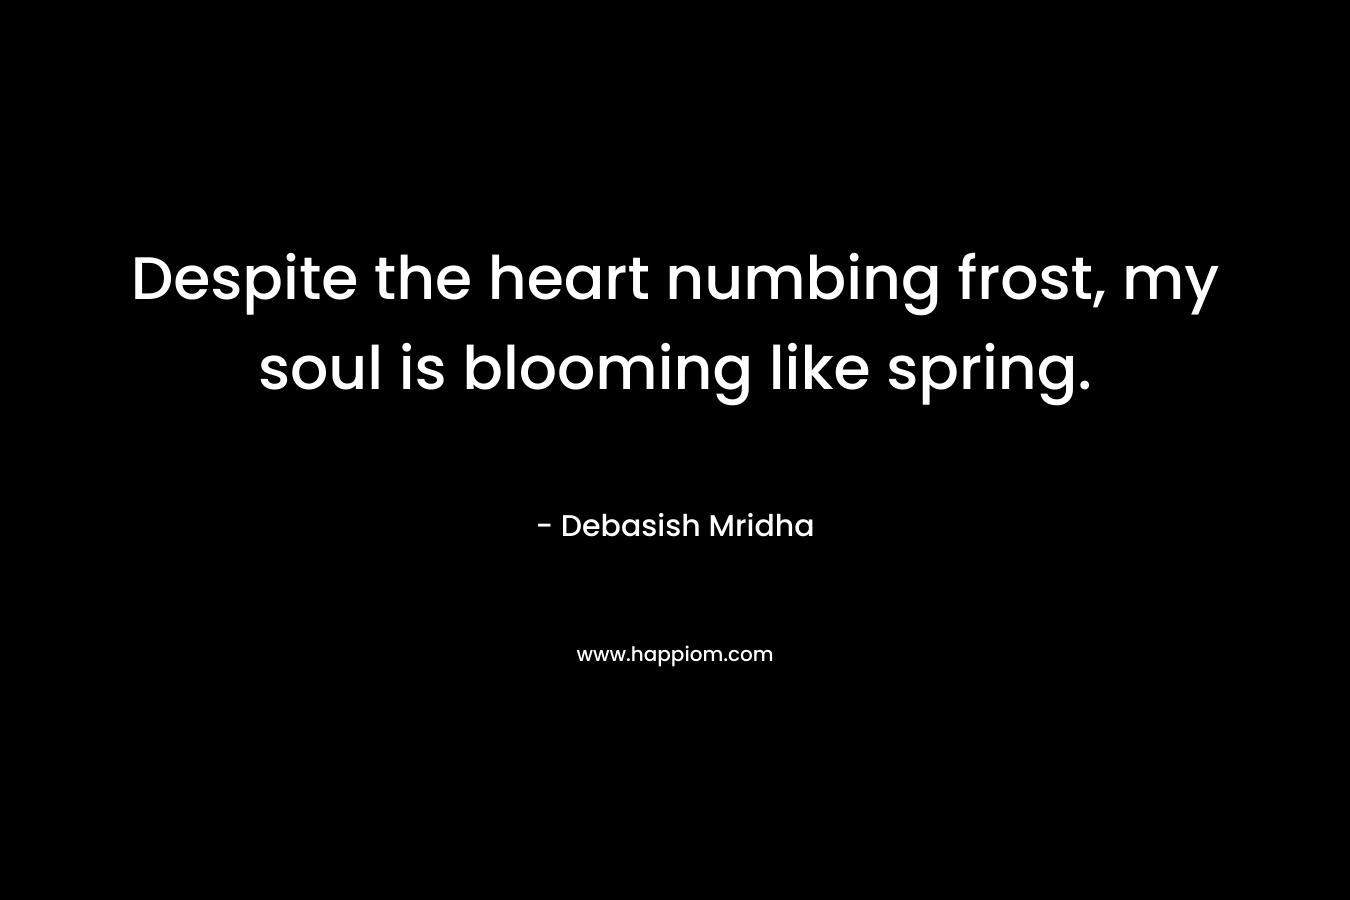 Despite the heart numbing frost, my soul is blooming like spring. – Debasish Mridha